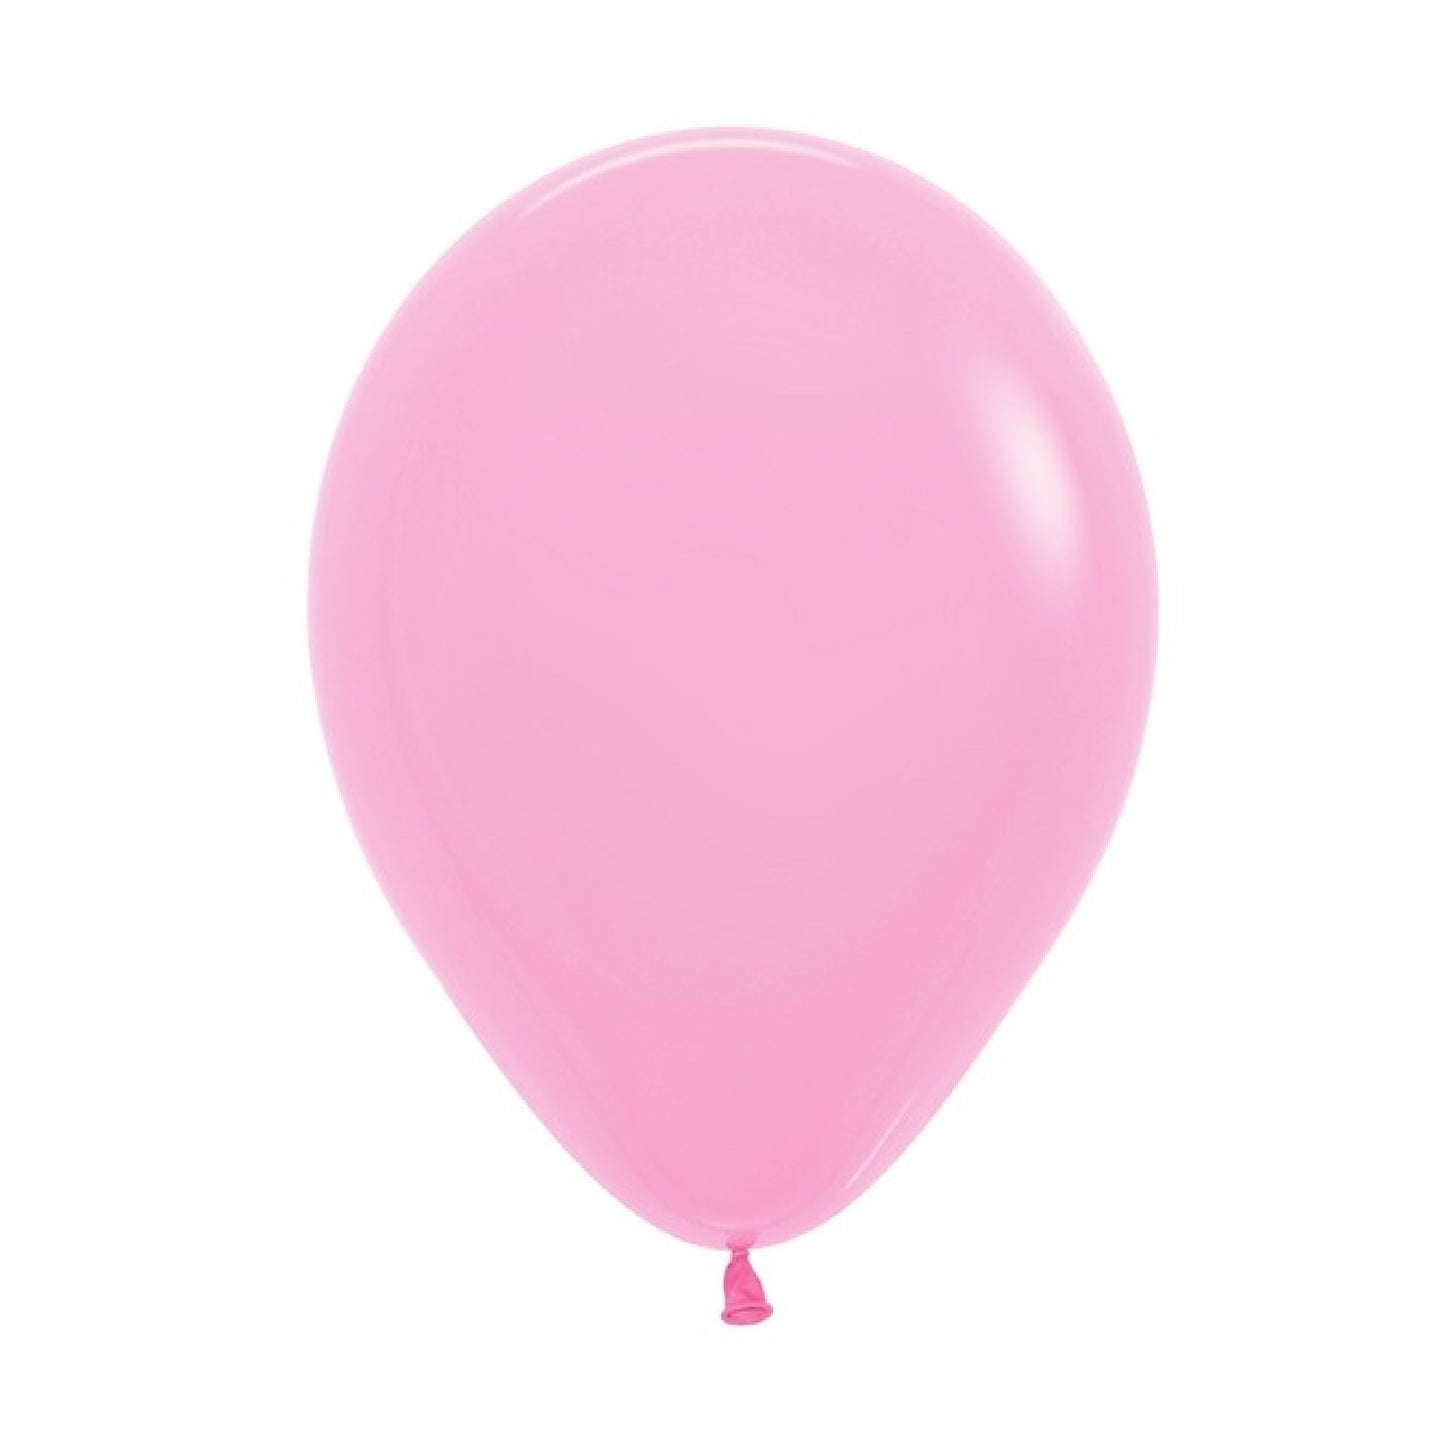 11 inch helium filled Baby Pink latex balloon